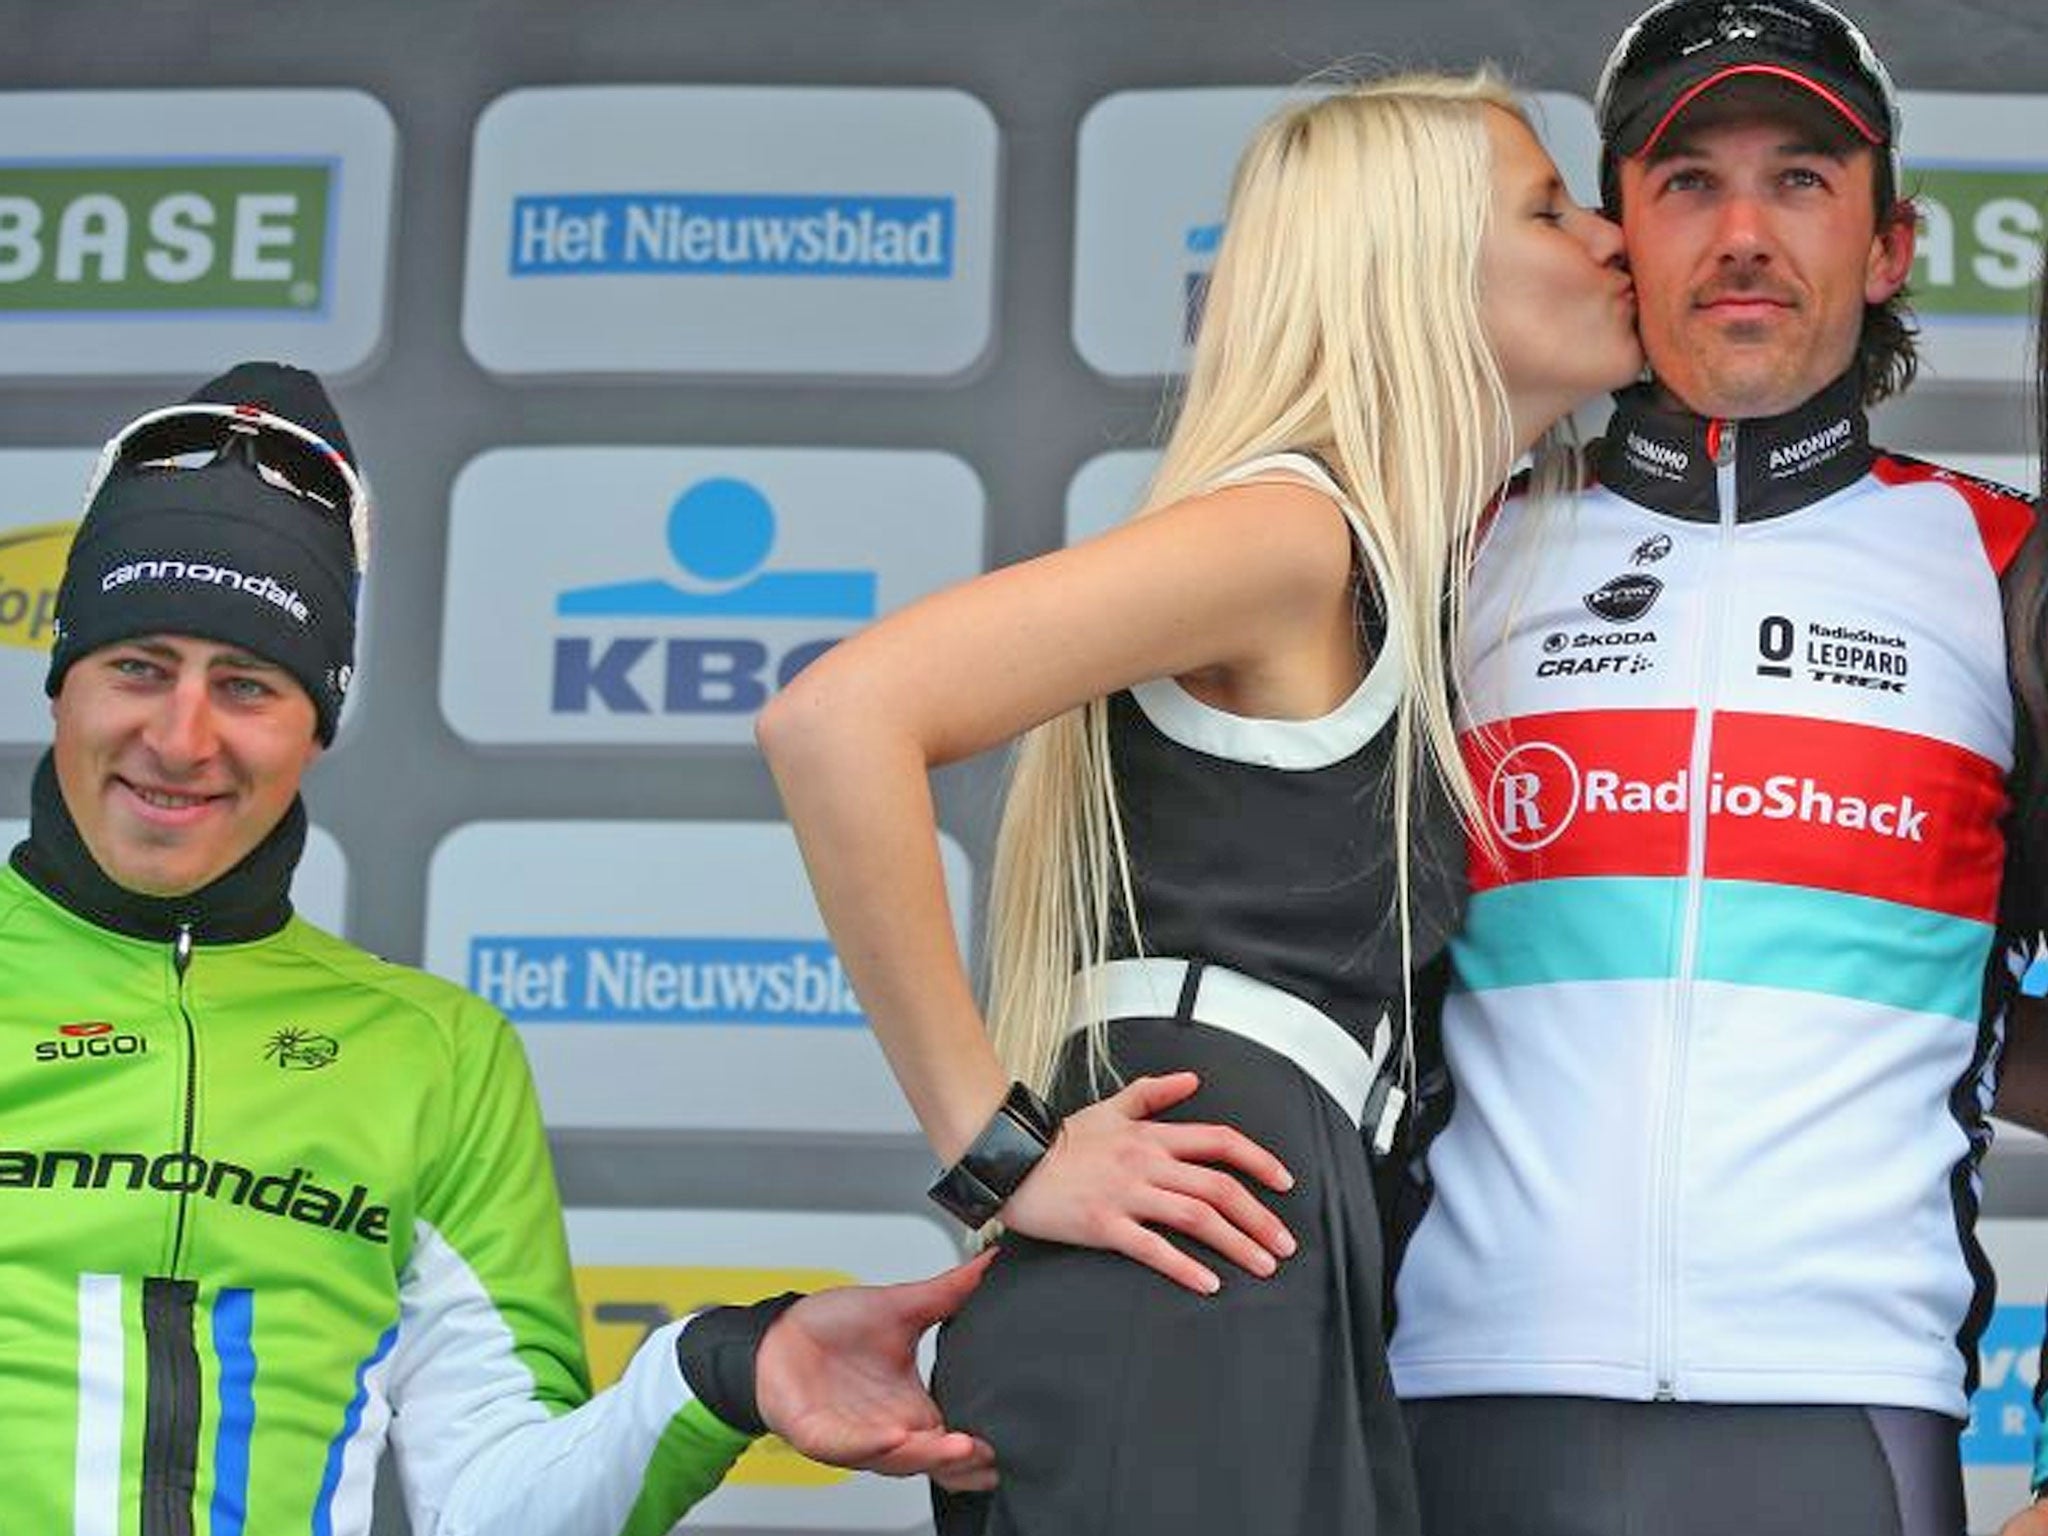 Slovakian cyclist Peter Sagan was caught pinching the bottom of a podium girl today